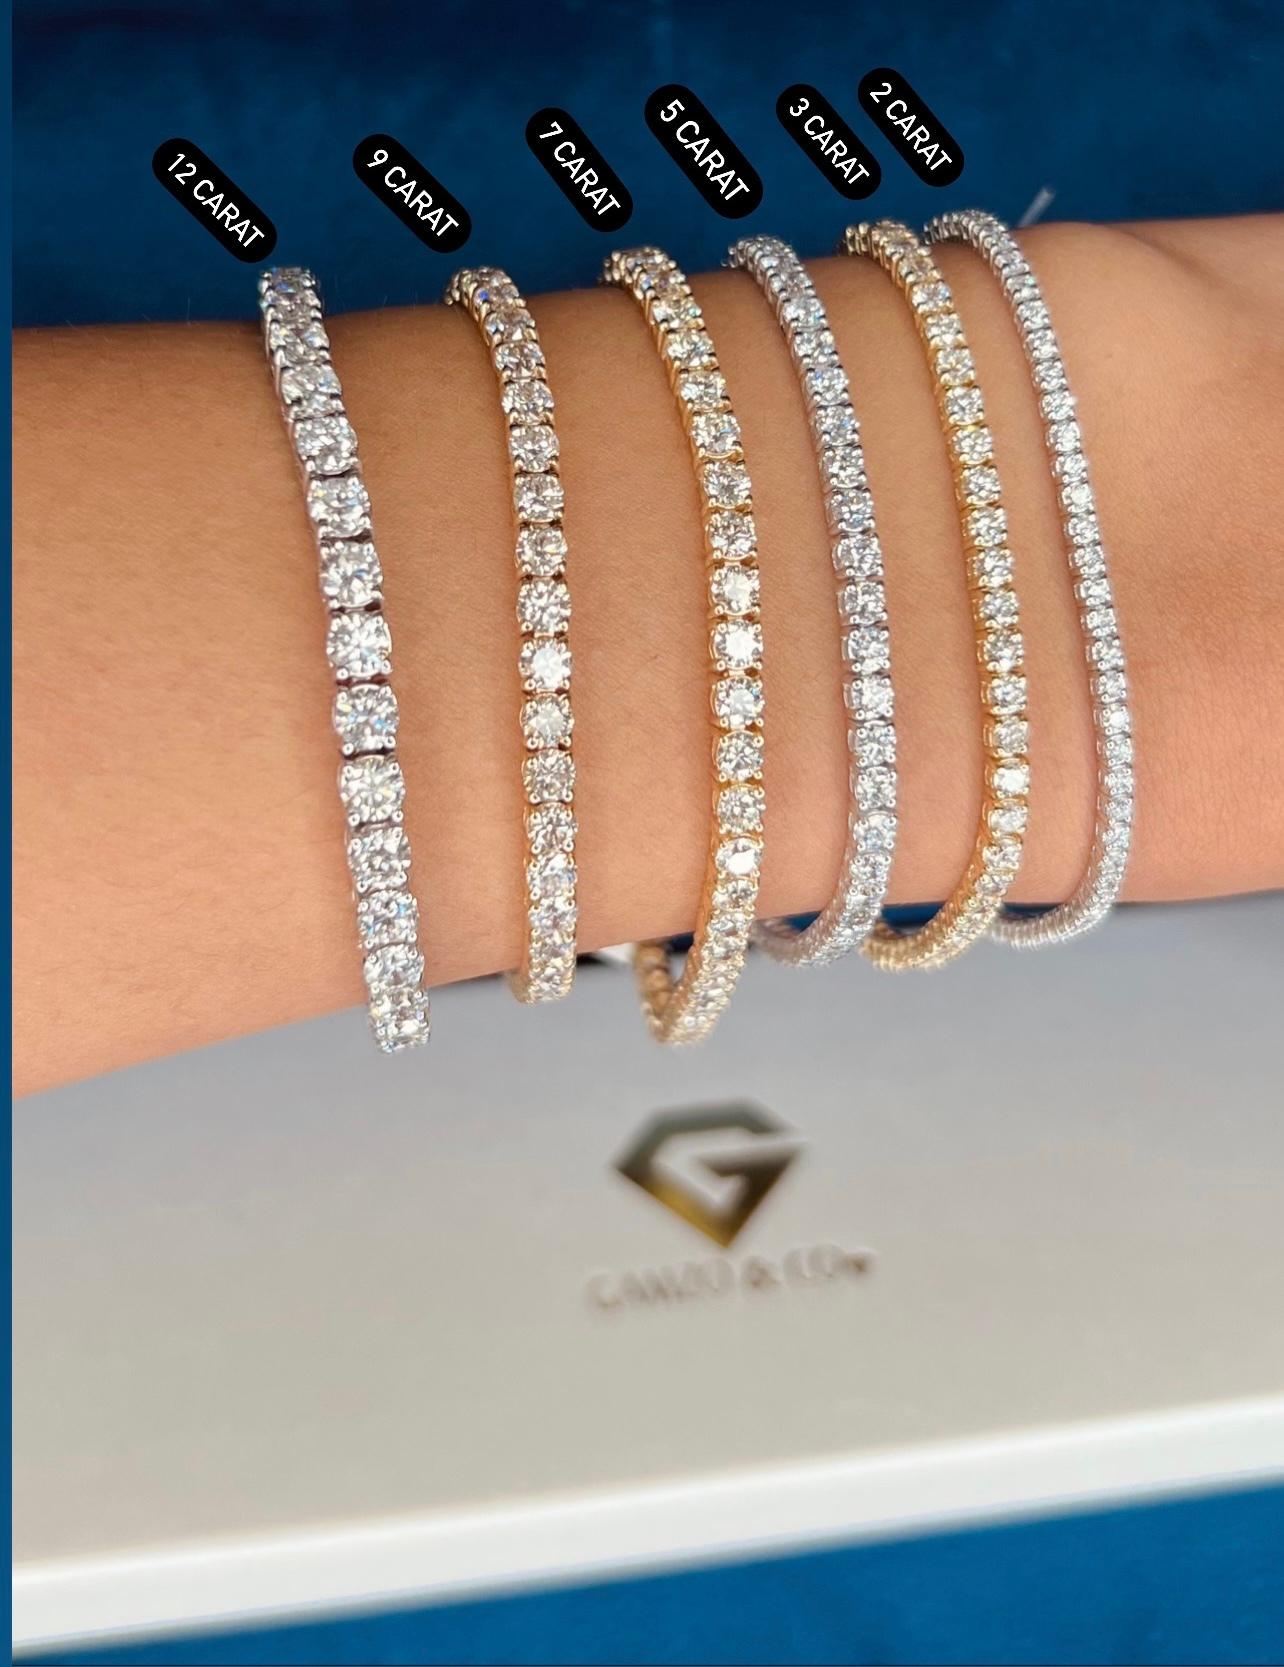 This diamond tennis bracelet features beautifully cut round diamonds set gorgeously in 14k gold.

Metal: 14k Gold
Diamond Cut: Round Natural Diamond 
Total Diamond Carats: 3ct
Diamond Clarity: VS
Diamond Color: F-G
Color: Yellow Gold
Bracelet